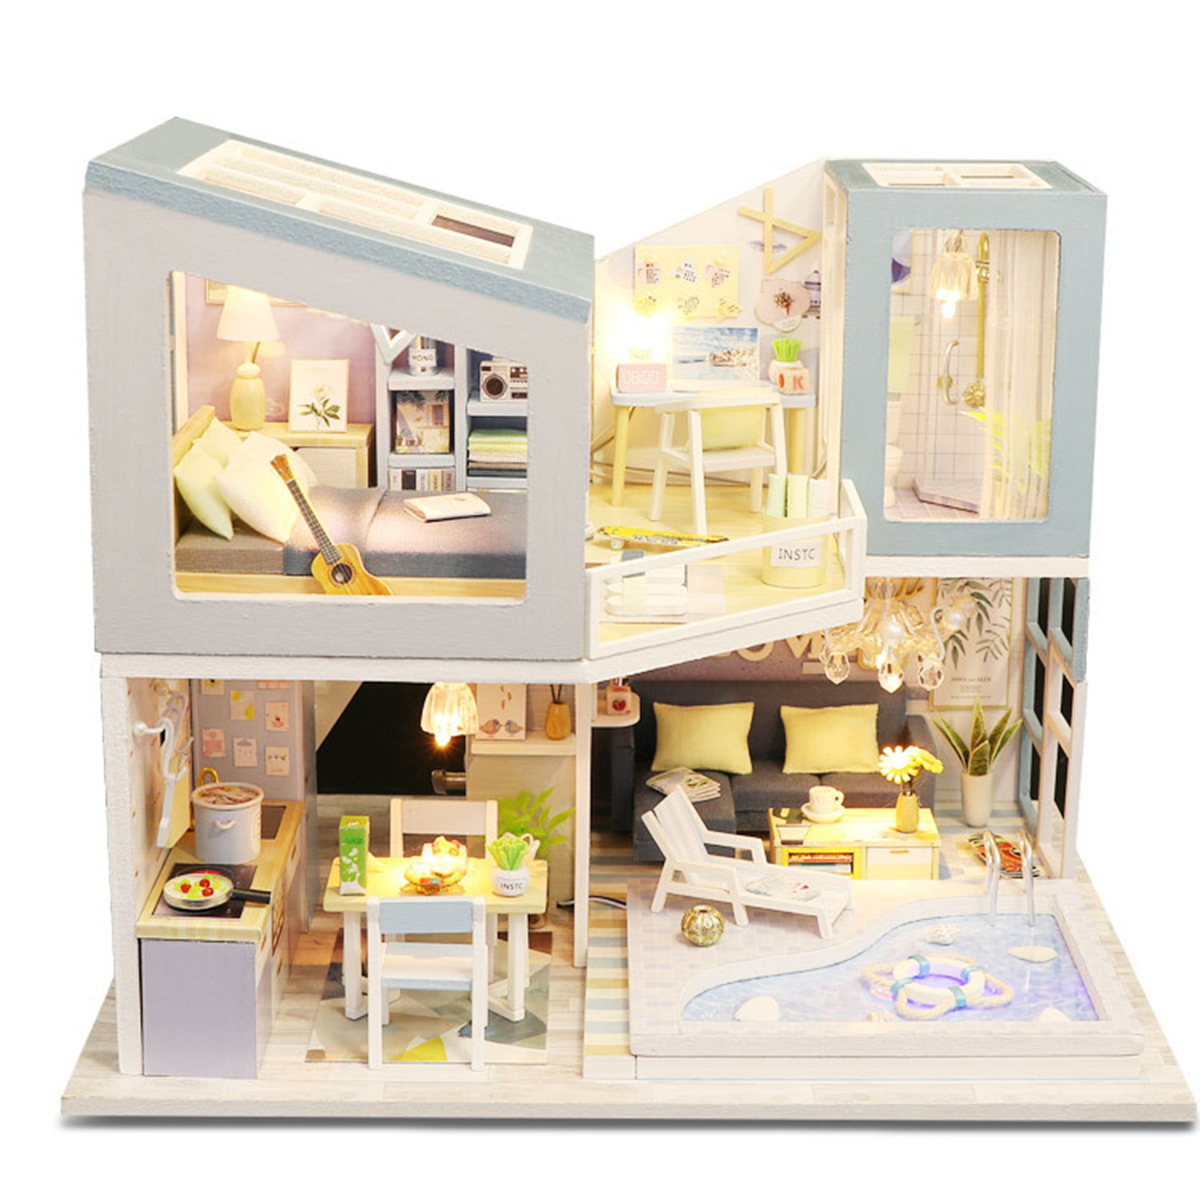 

DIY Wooden Cabin Hand-assembled Doll House Furniture Kits with LED Light Toy